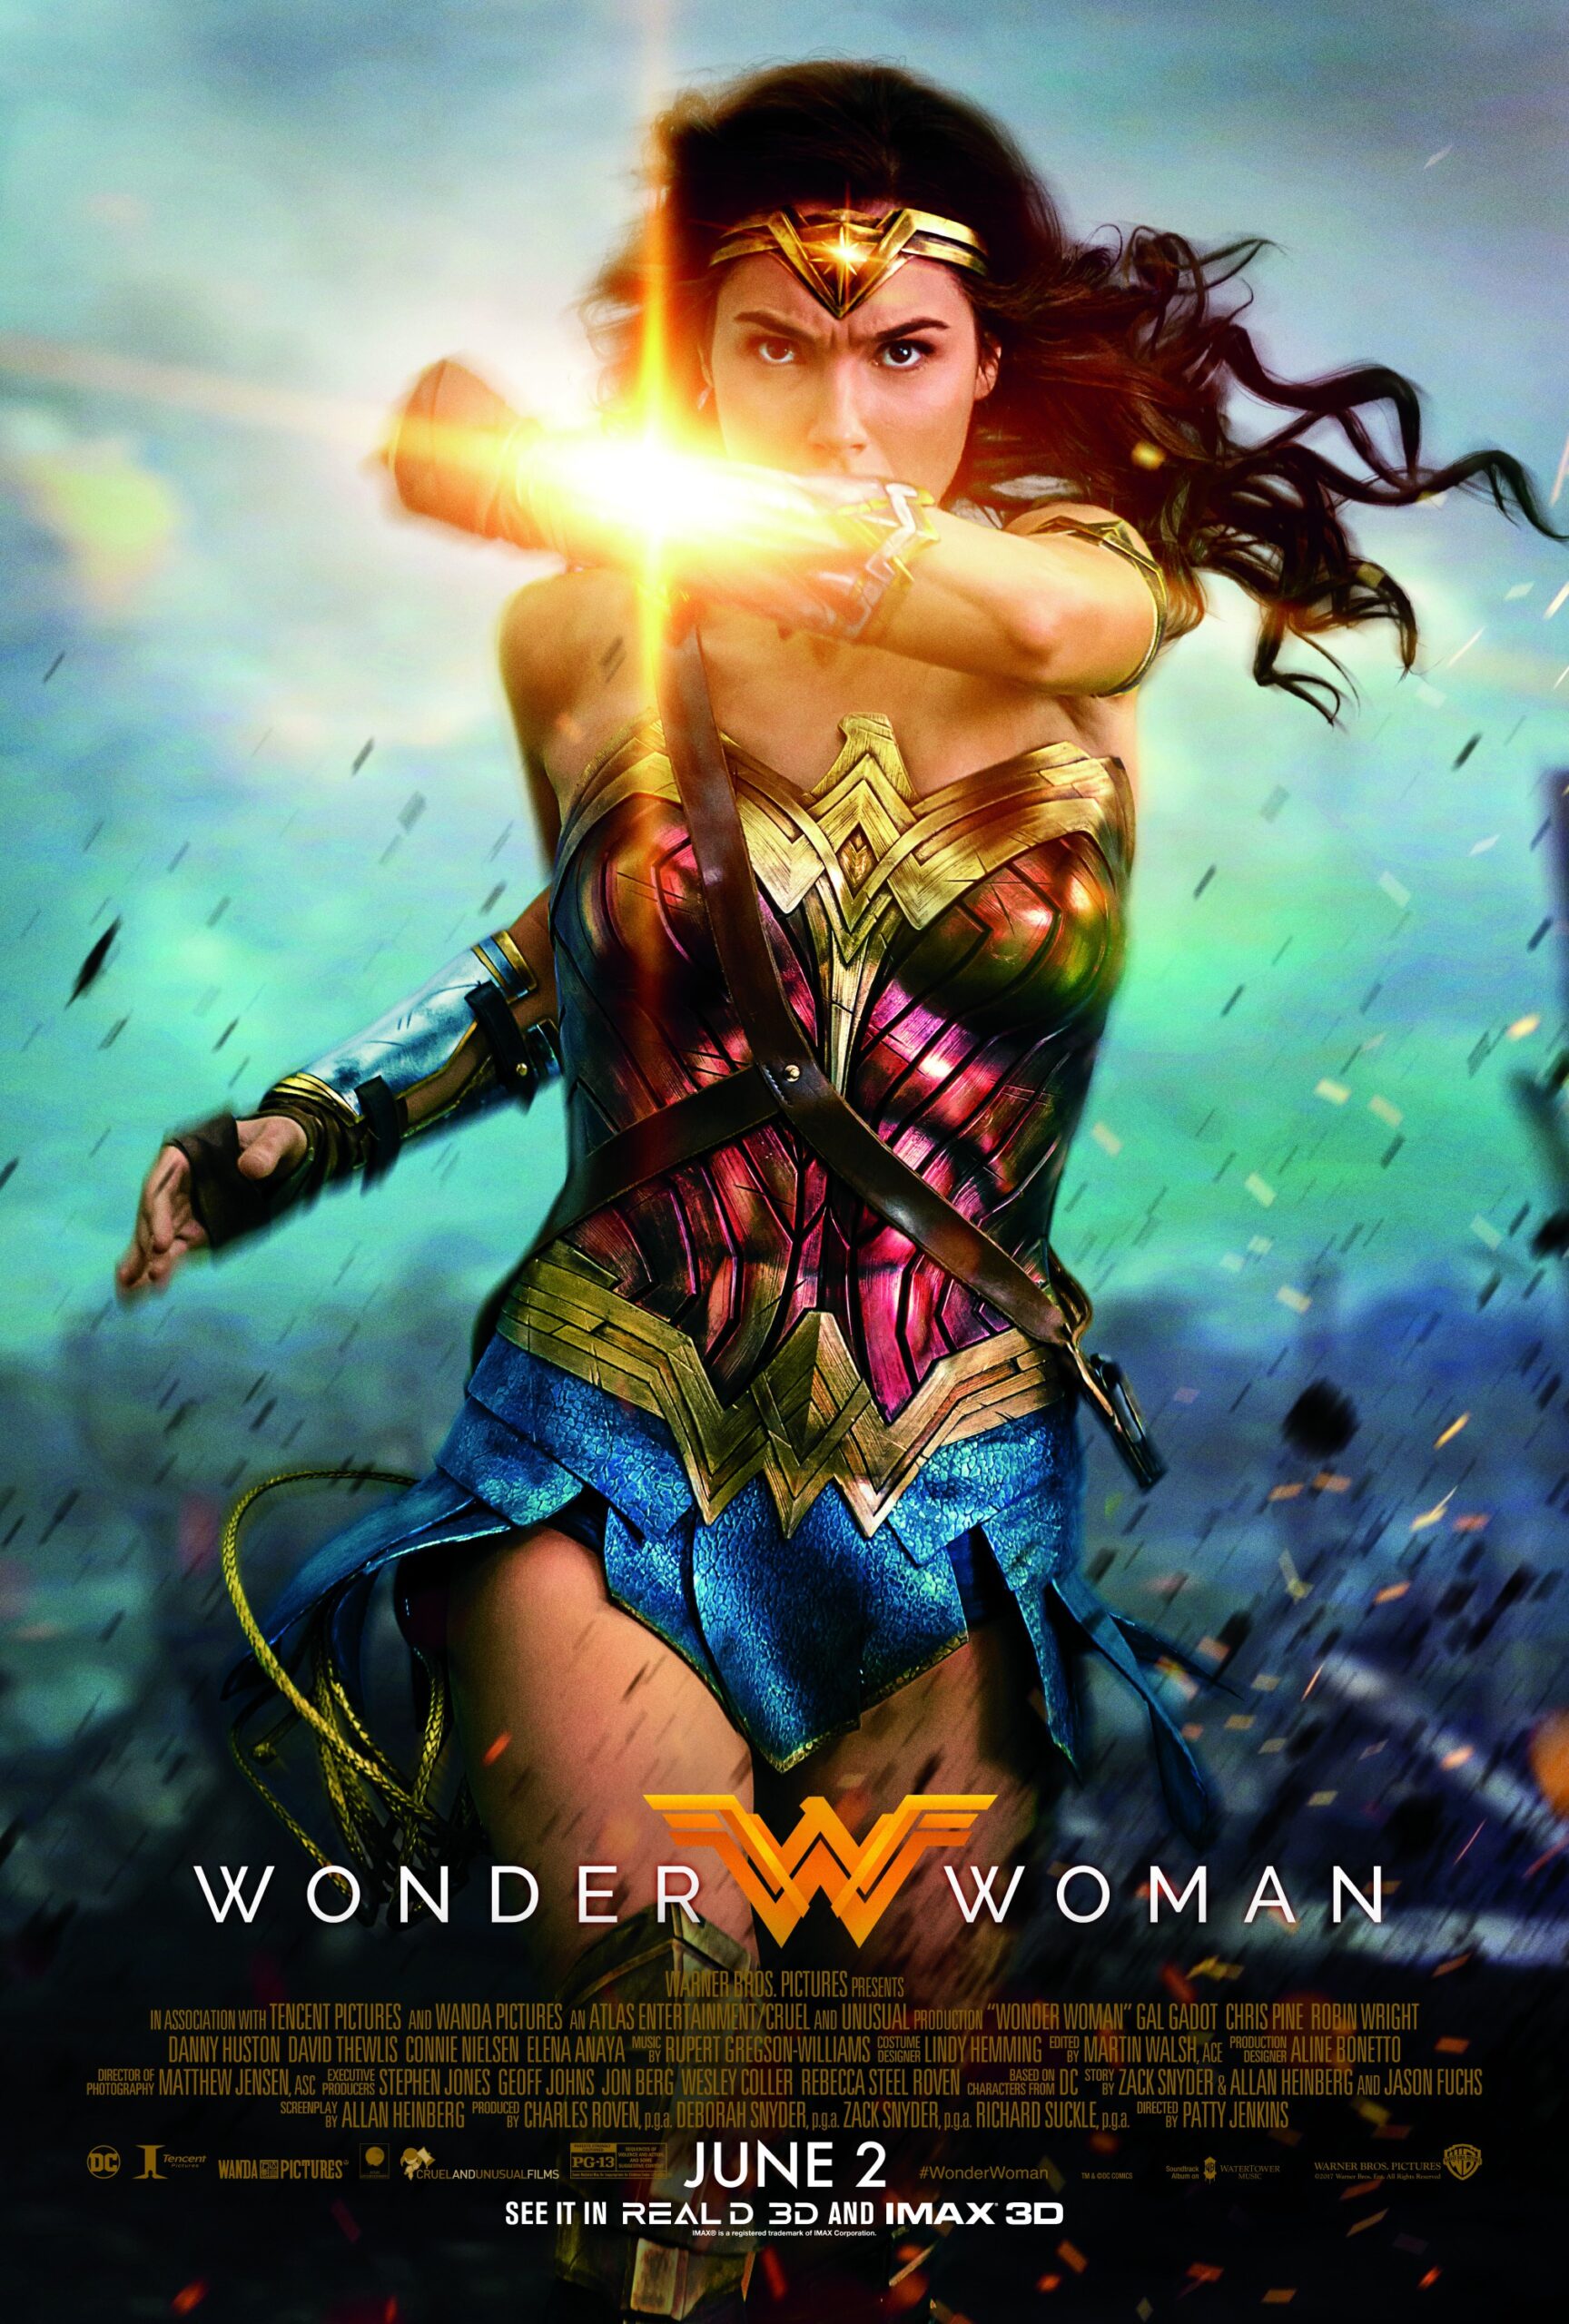 wonder woman is the dc movie in order list of how to watch with gill gadot